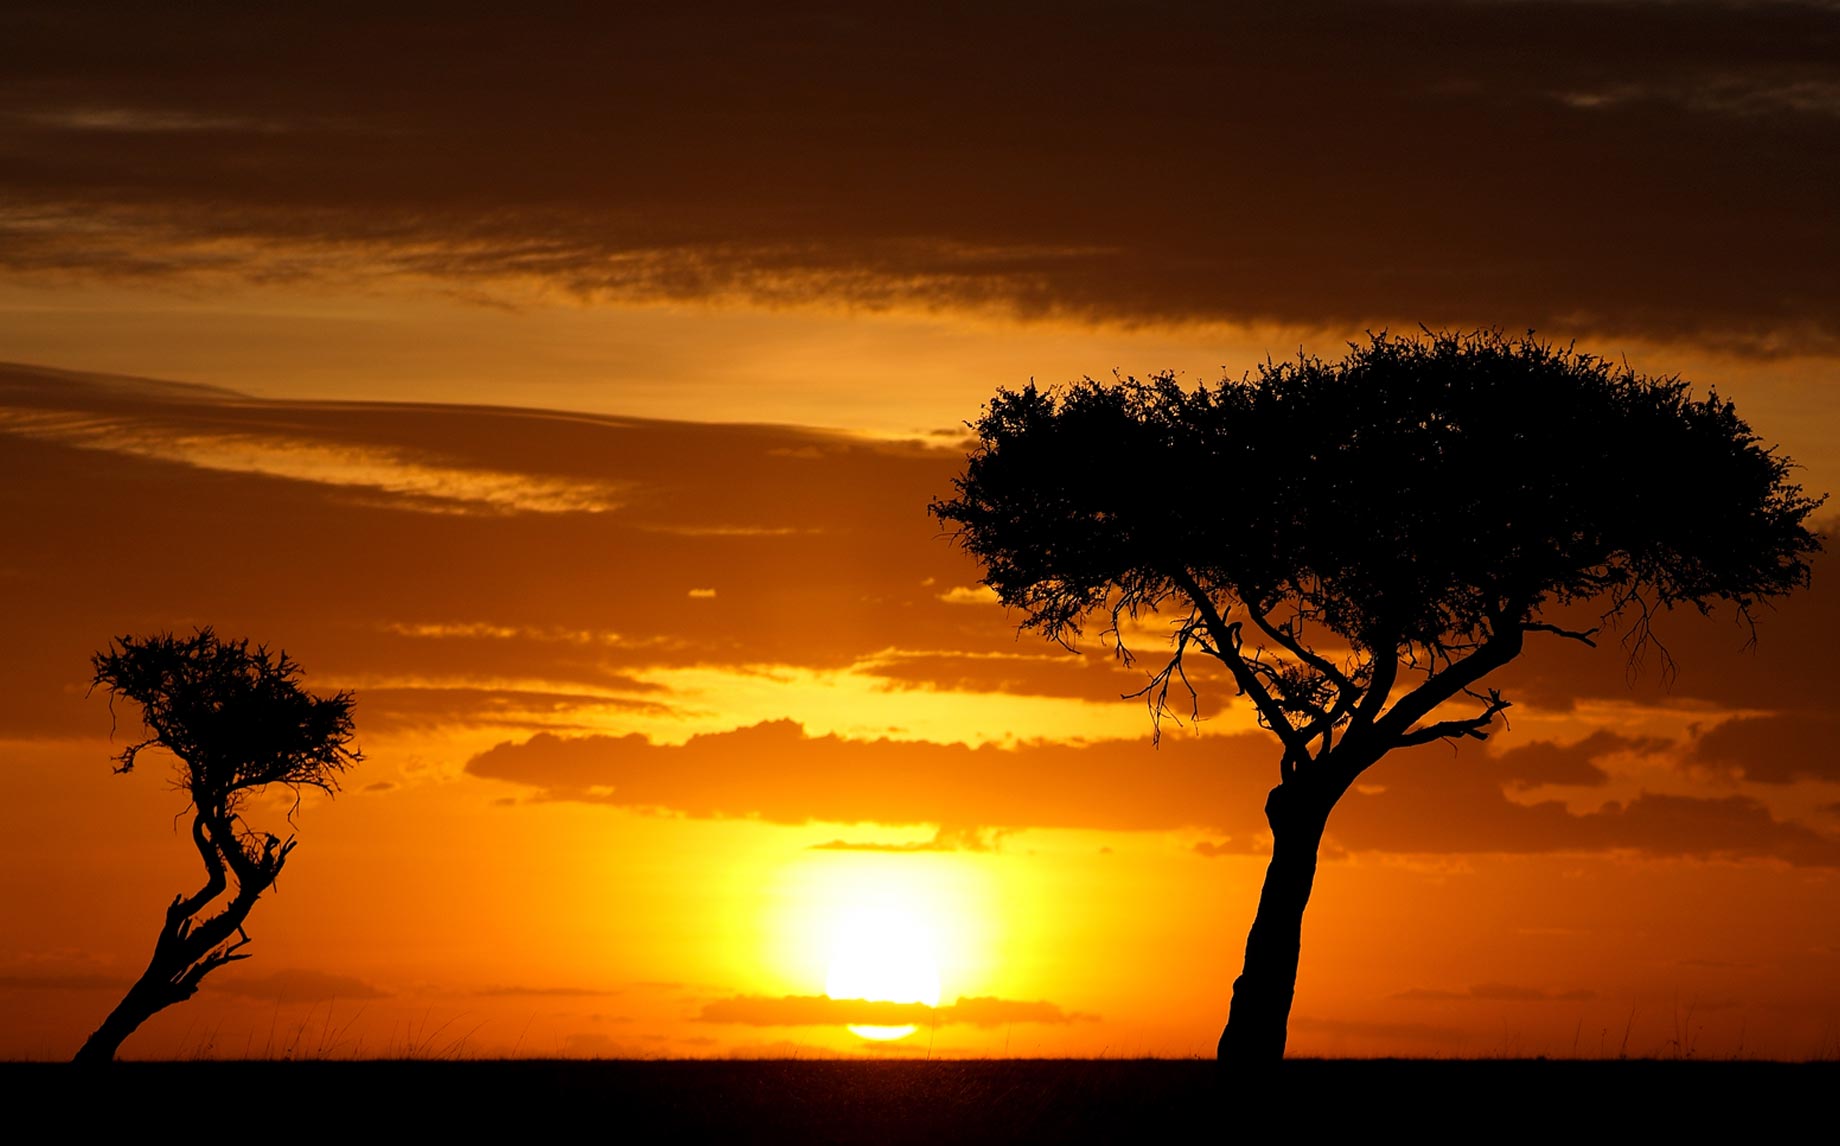 A First Timer's Guide to Kenya, Travel Information about Kenya